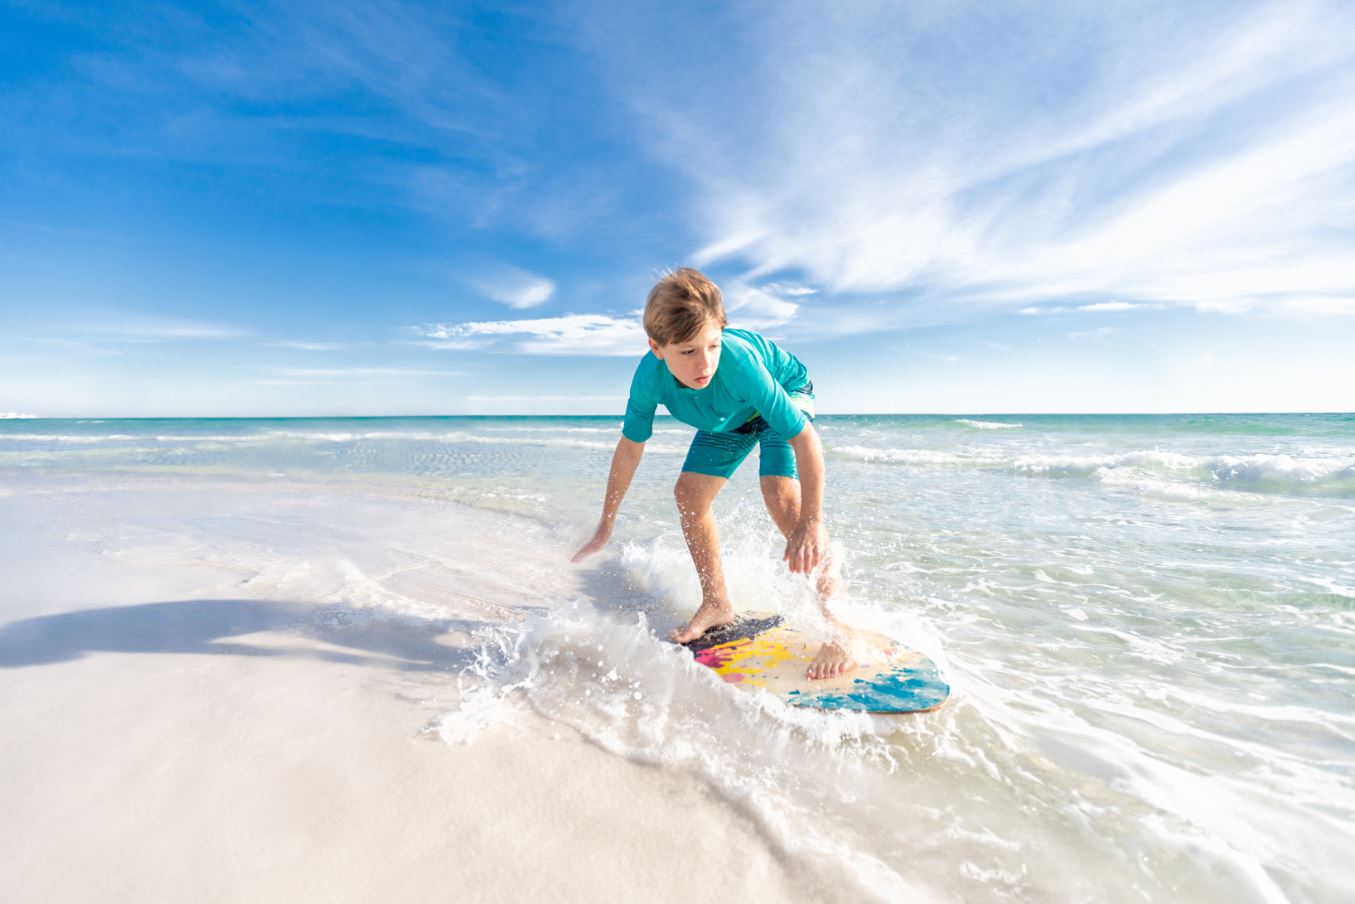 Skimboarding along the white sand beaches of Destin, Florida is one of the many ways beach activities that allow families to enjoy the outdoors while social distancing.